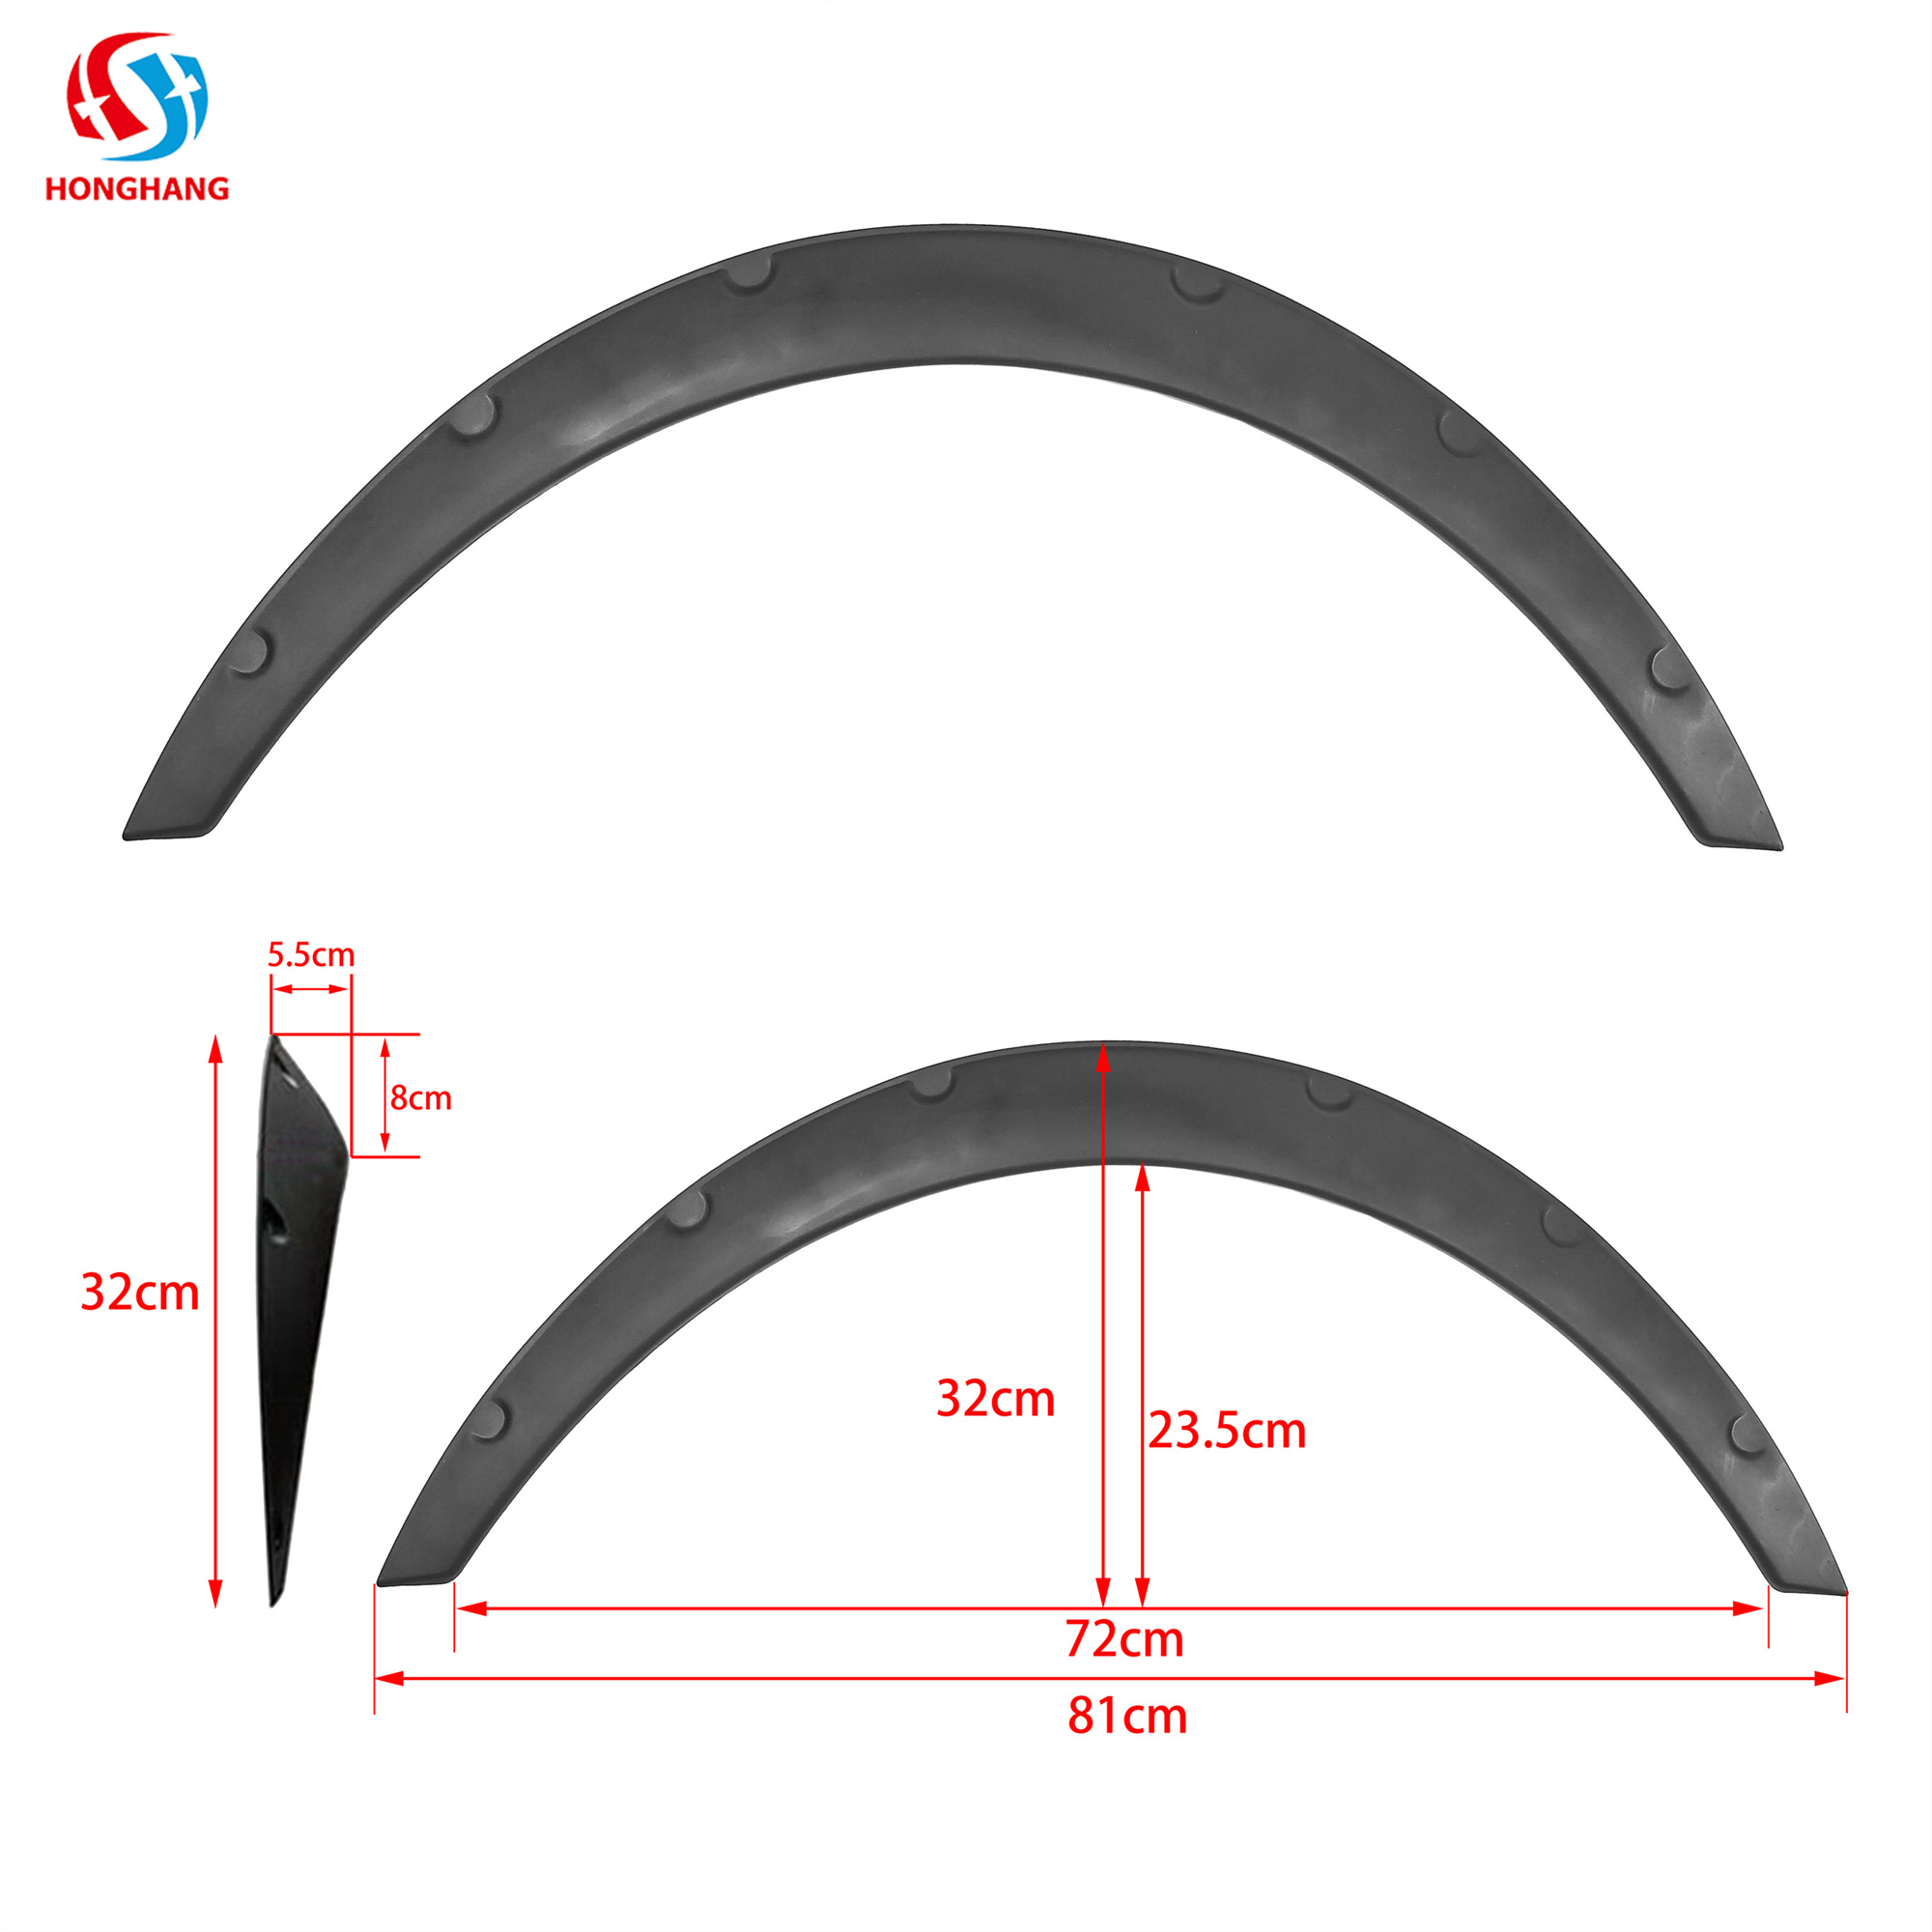 Type A 4pcs/set Small Size Universal PP Material Fender Flares For All Sedan Cars 